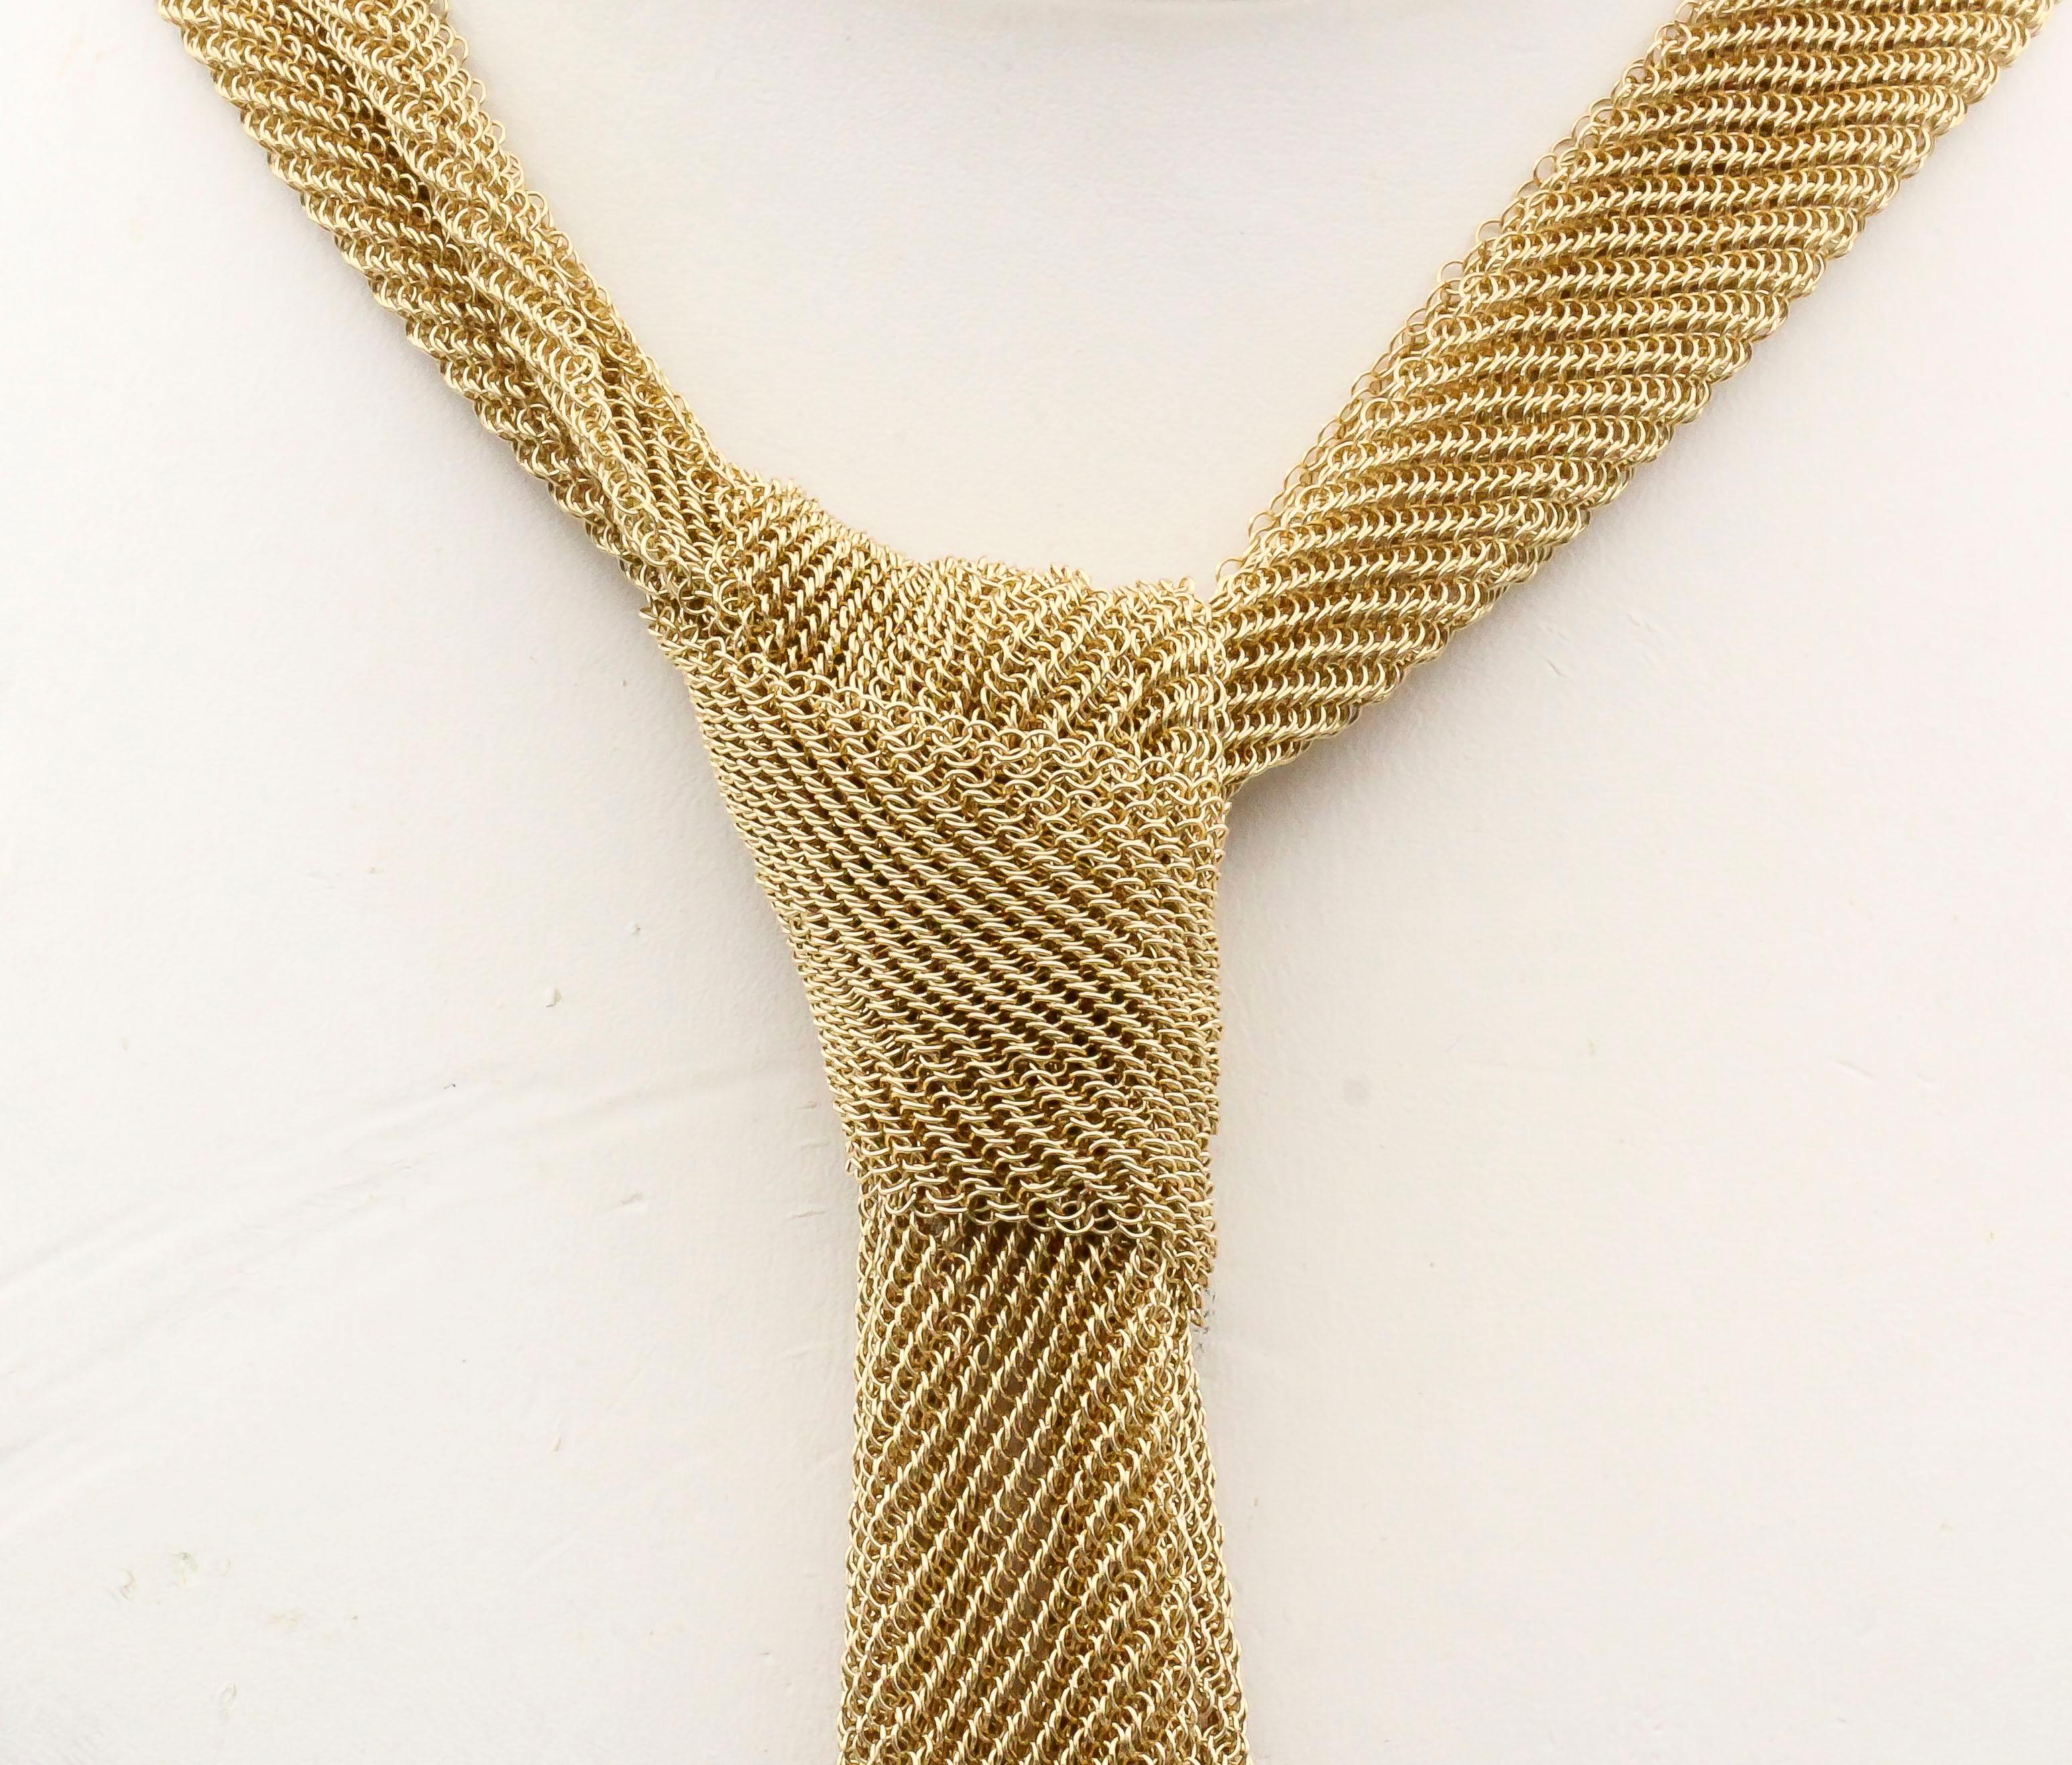 Chic and interesting mesh 18K yellow gold scarf necklace by Tiffany & Co. Peretti. Intricate mesh design, very light and delicate. Can be used in a number of way, even as a chic skinny tie as shown in one of the pictures.  This is the smaller of the